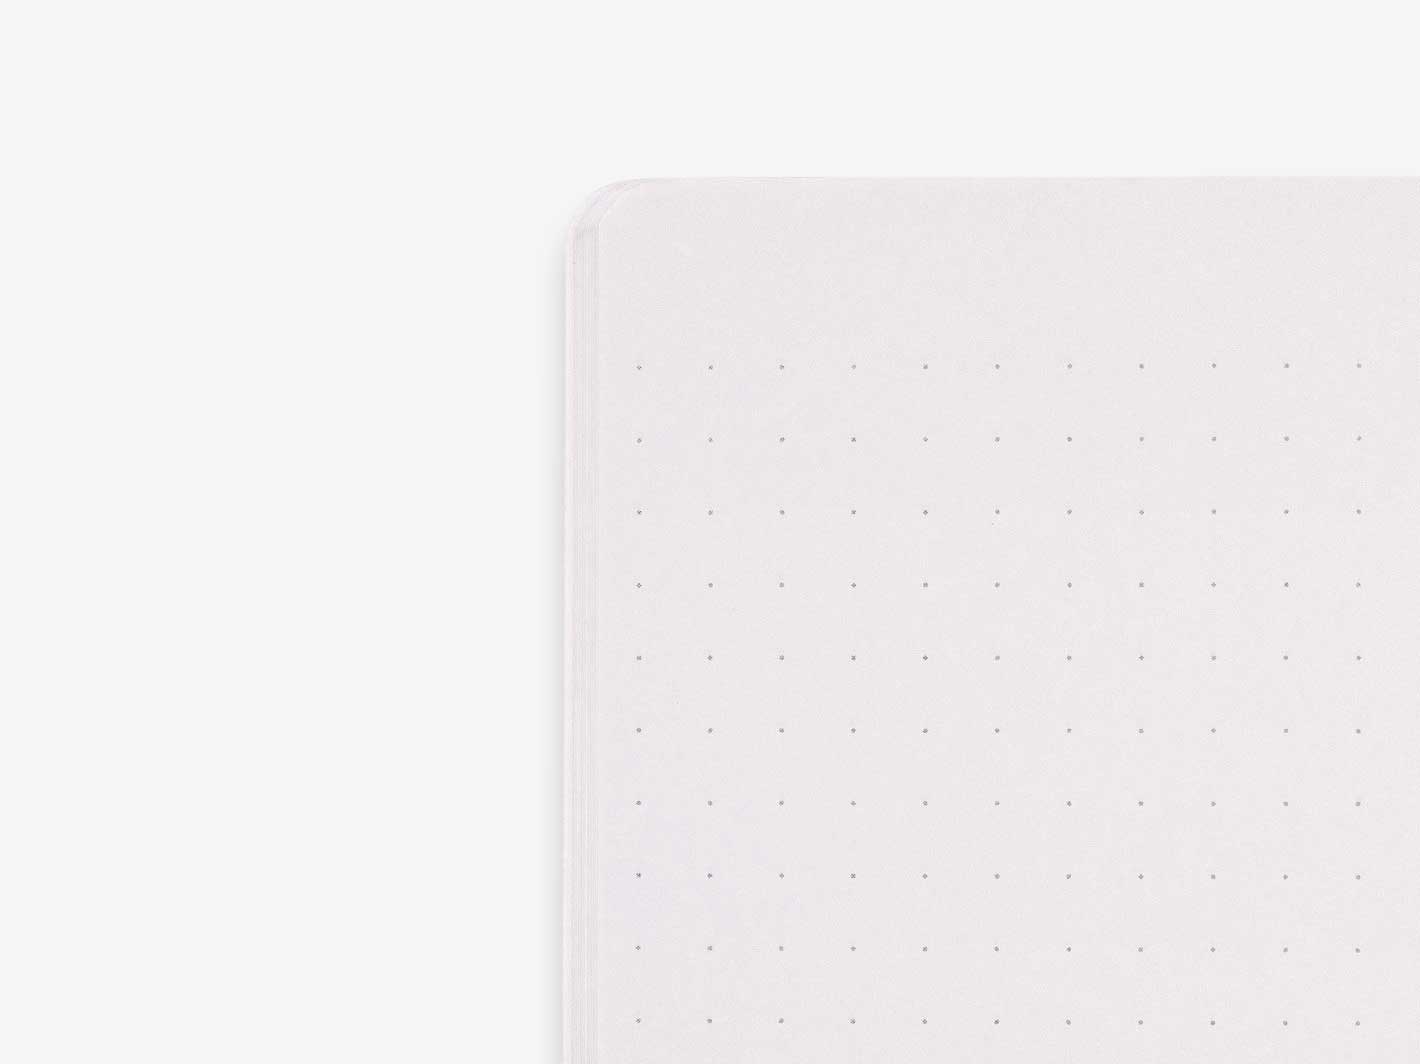 Color Dot Grid Notebook Lilac